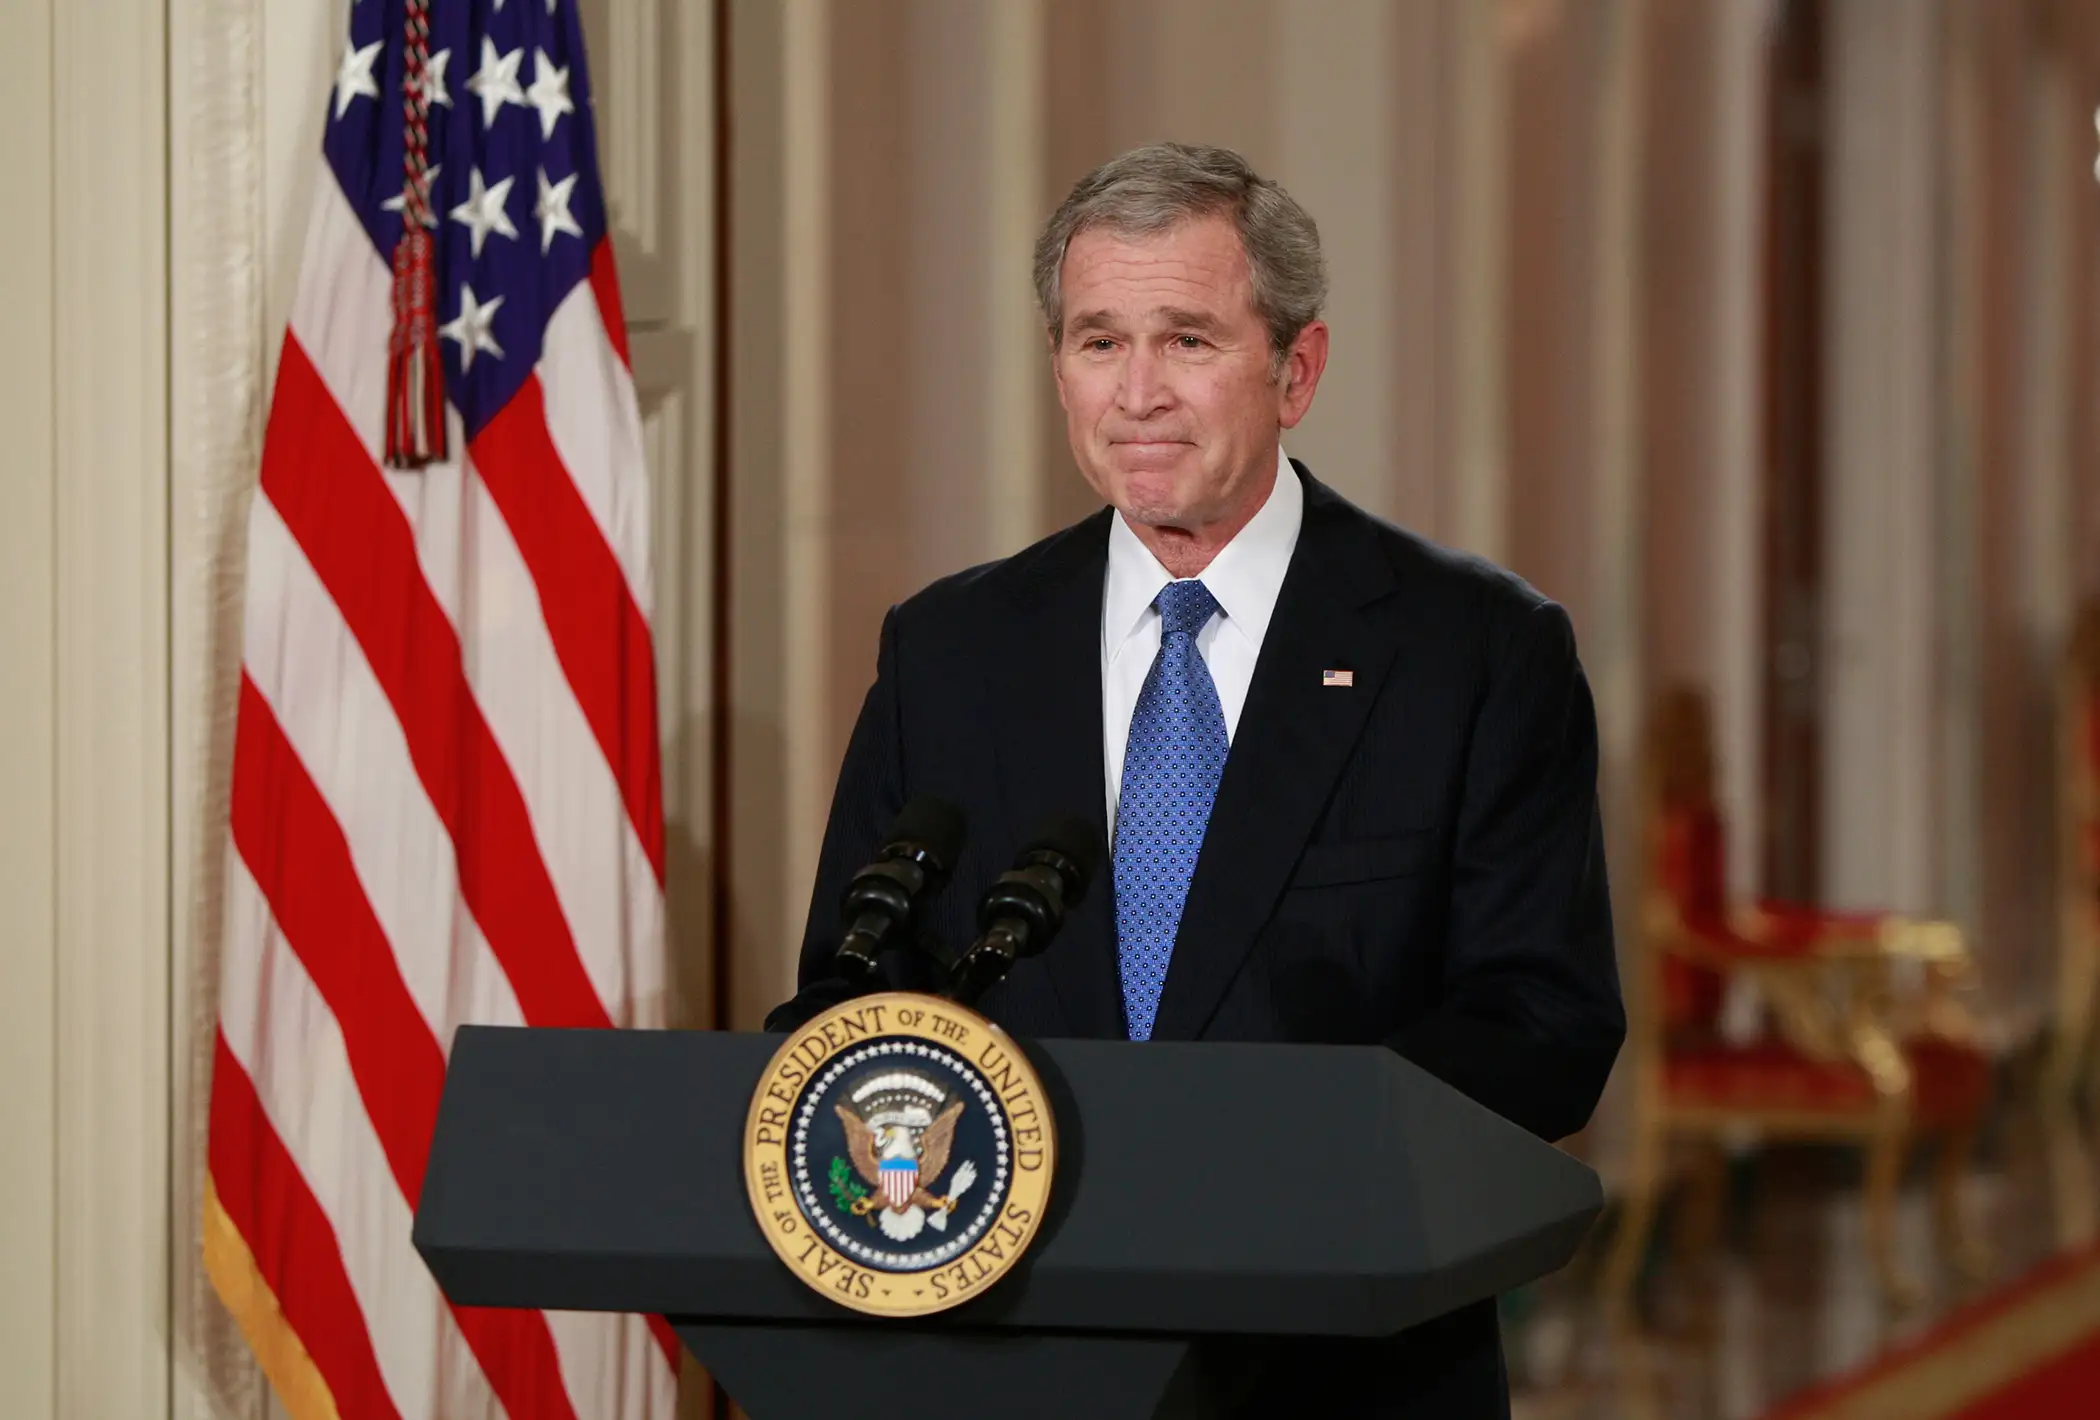 U.S. President George W. Bush completes his final live television address to the nation from the East Room of the White House in Washington January 15, 2009.